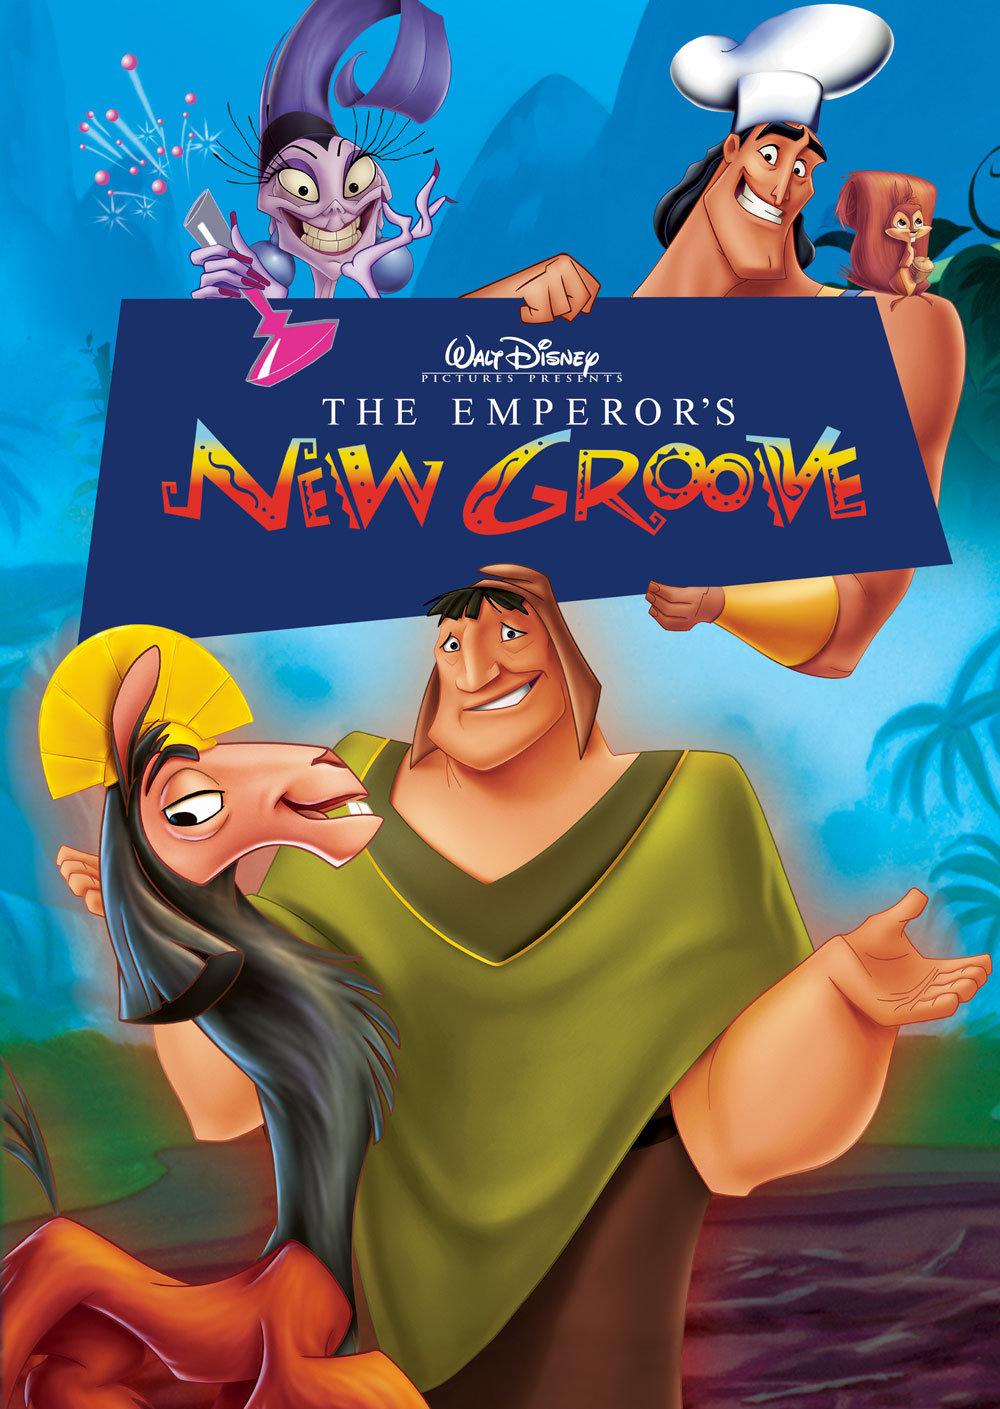 The Emperor's New Groove: Image Gallery (List View). Know